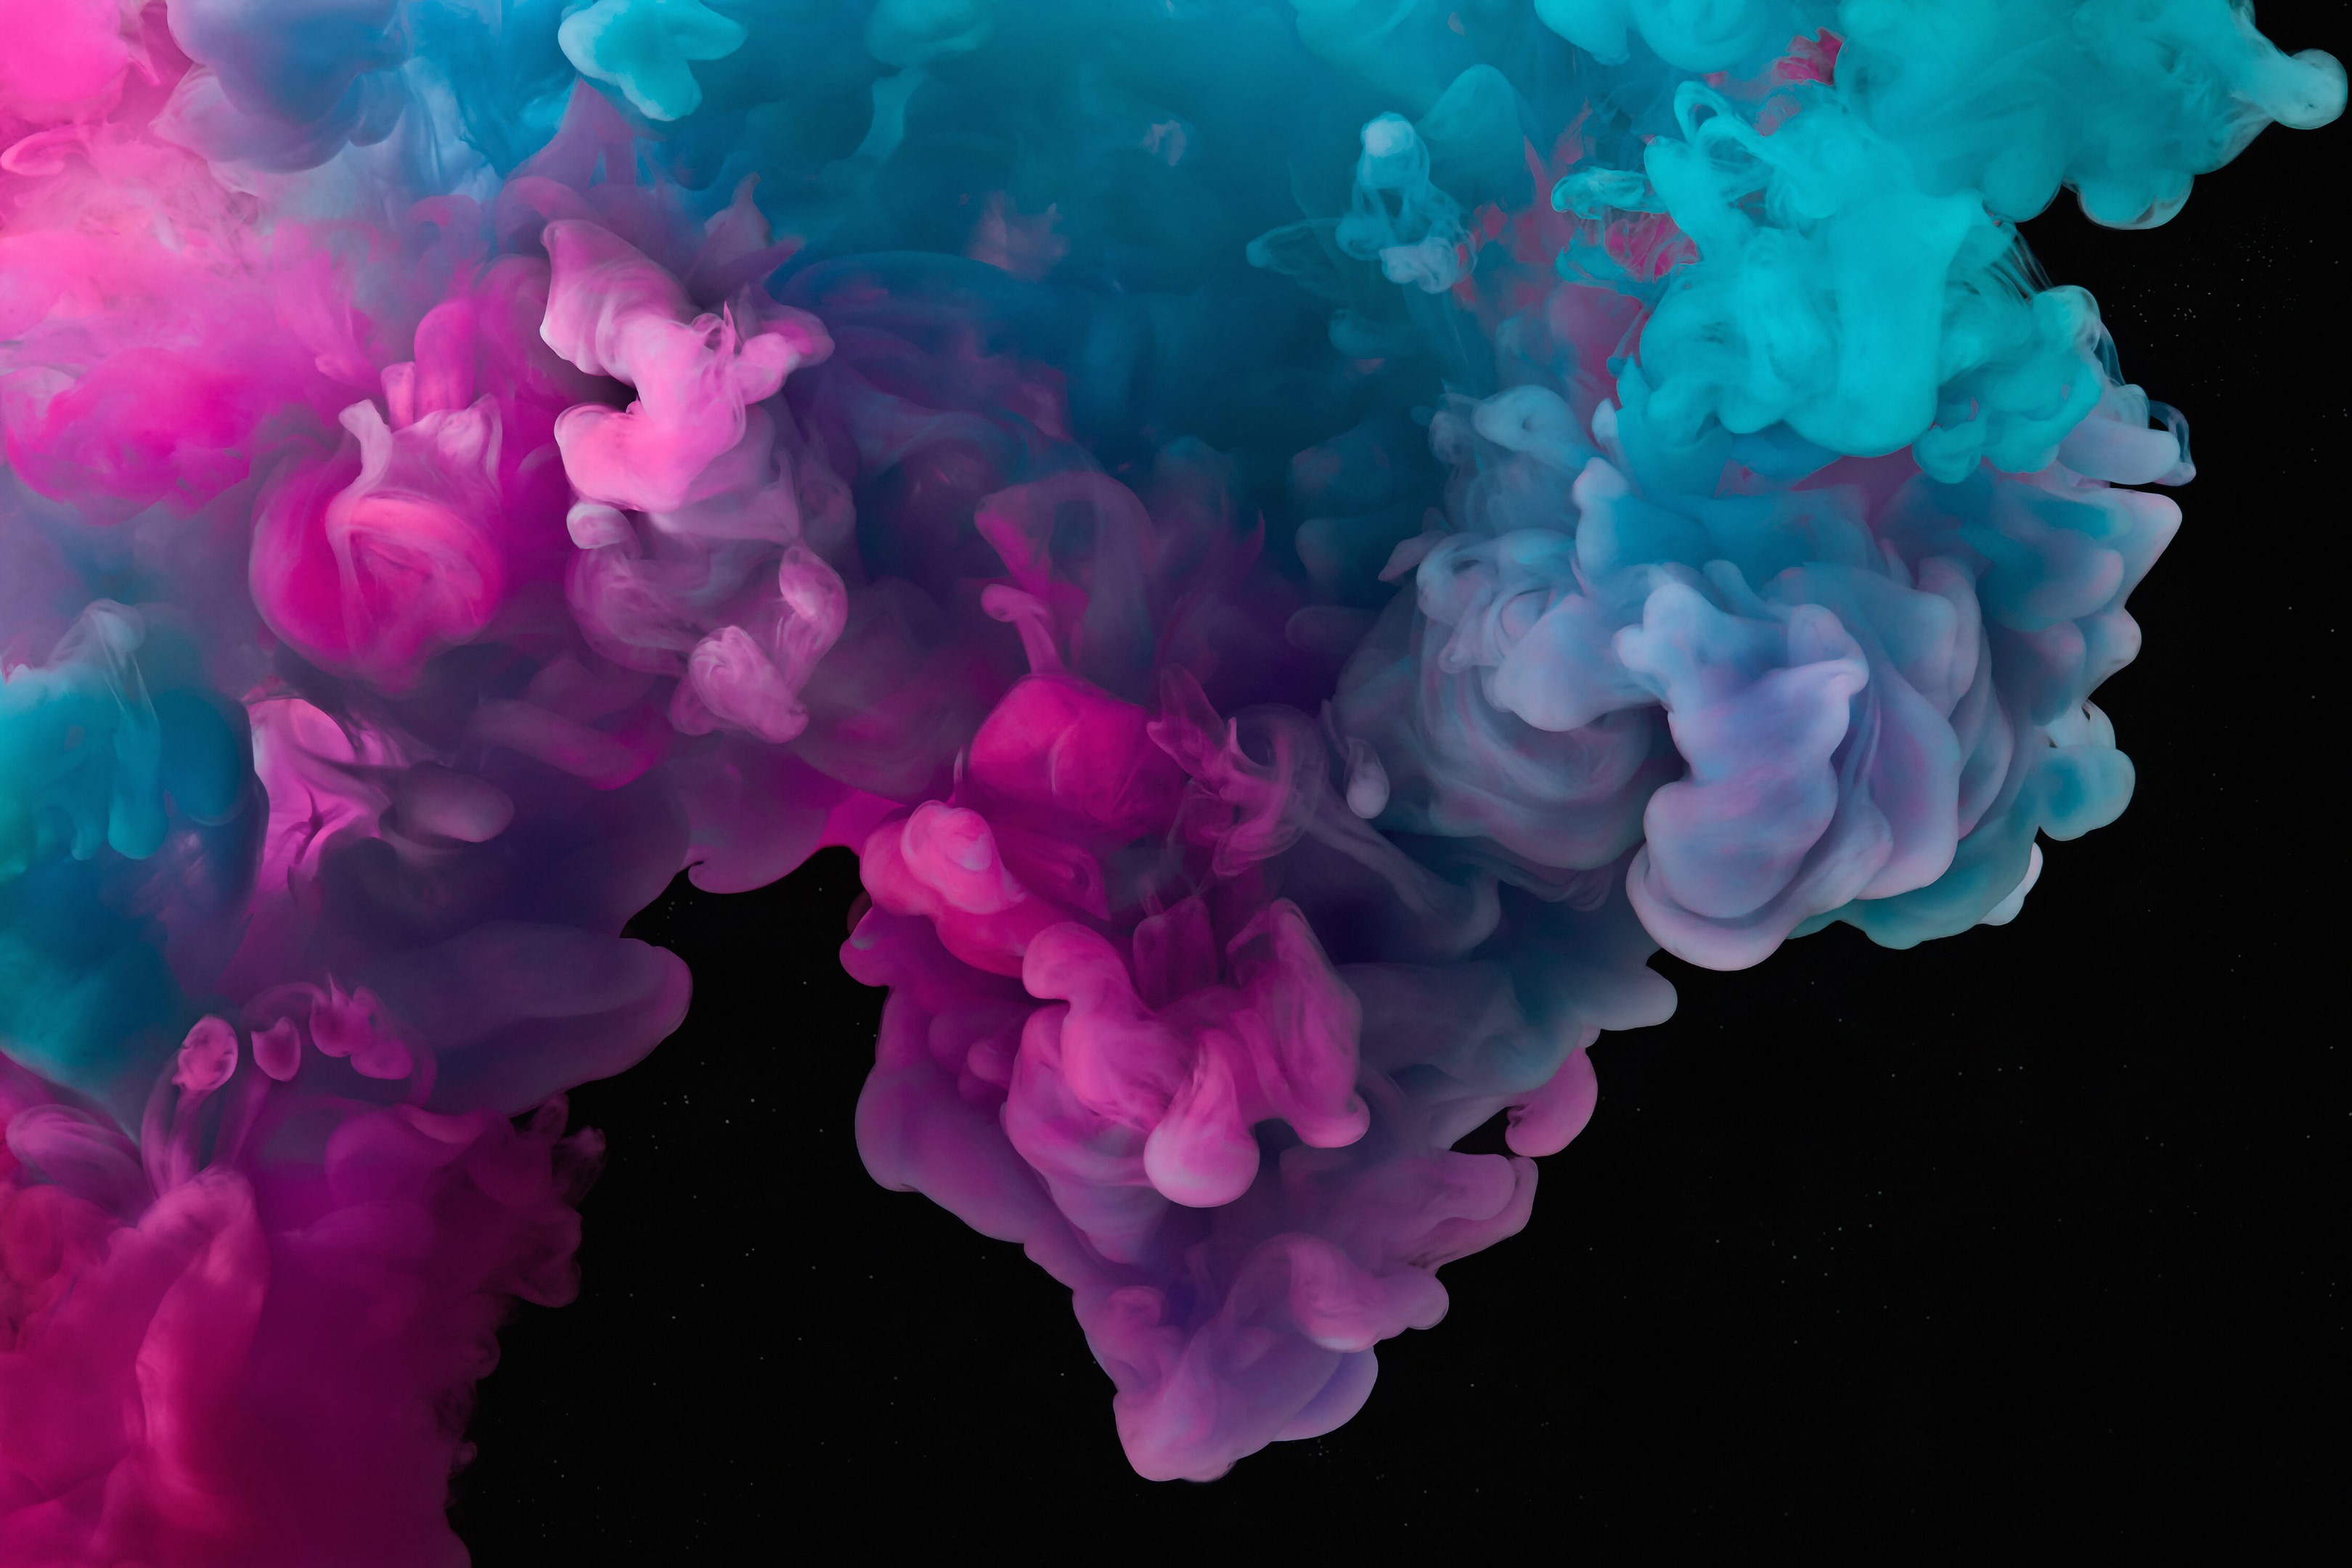 Microsoft Surface  Wallpapers on Behance